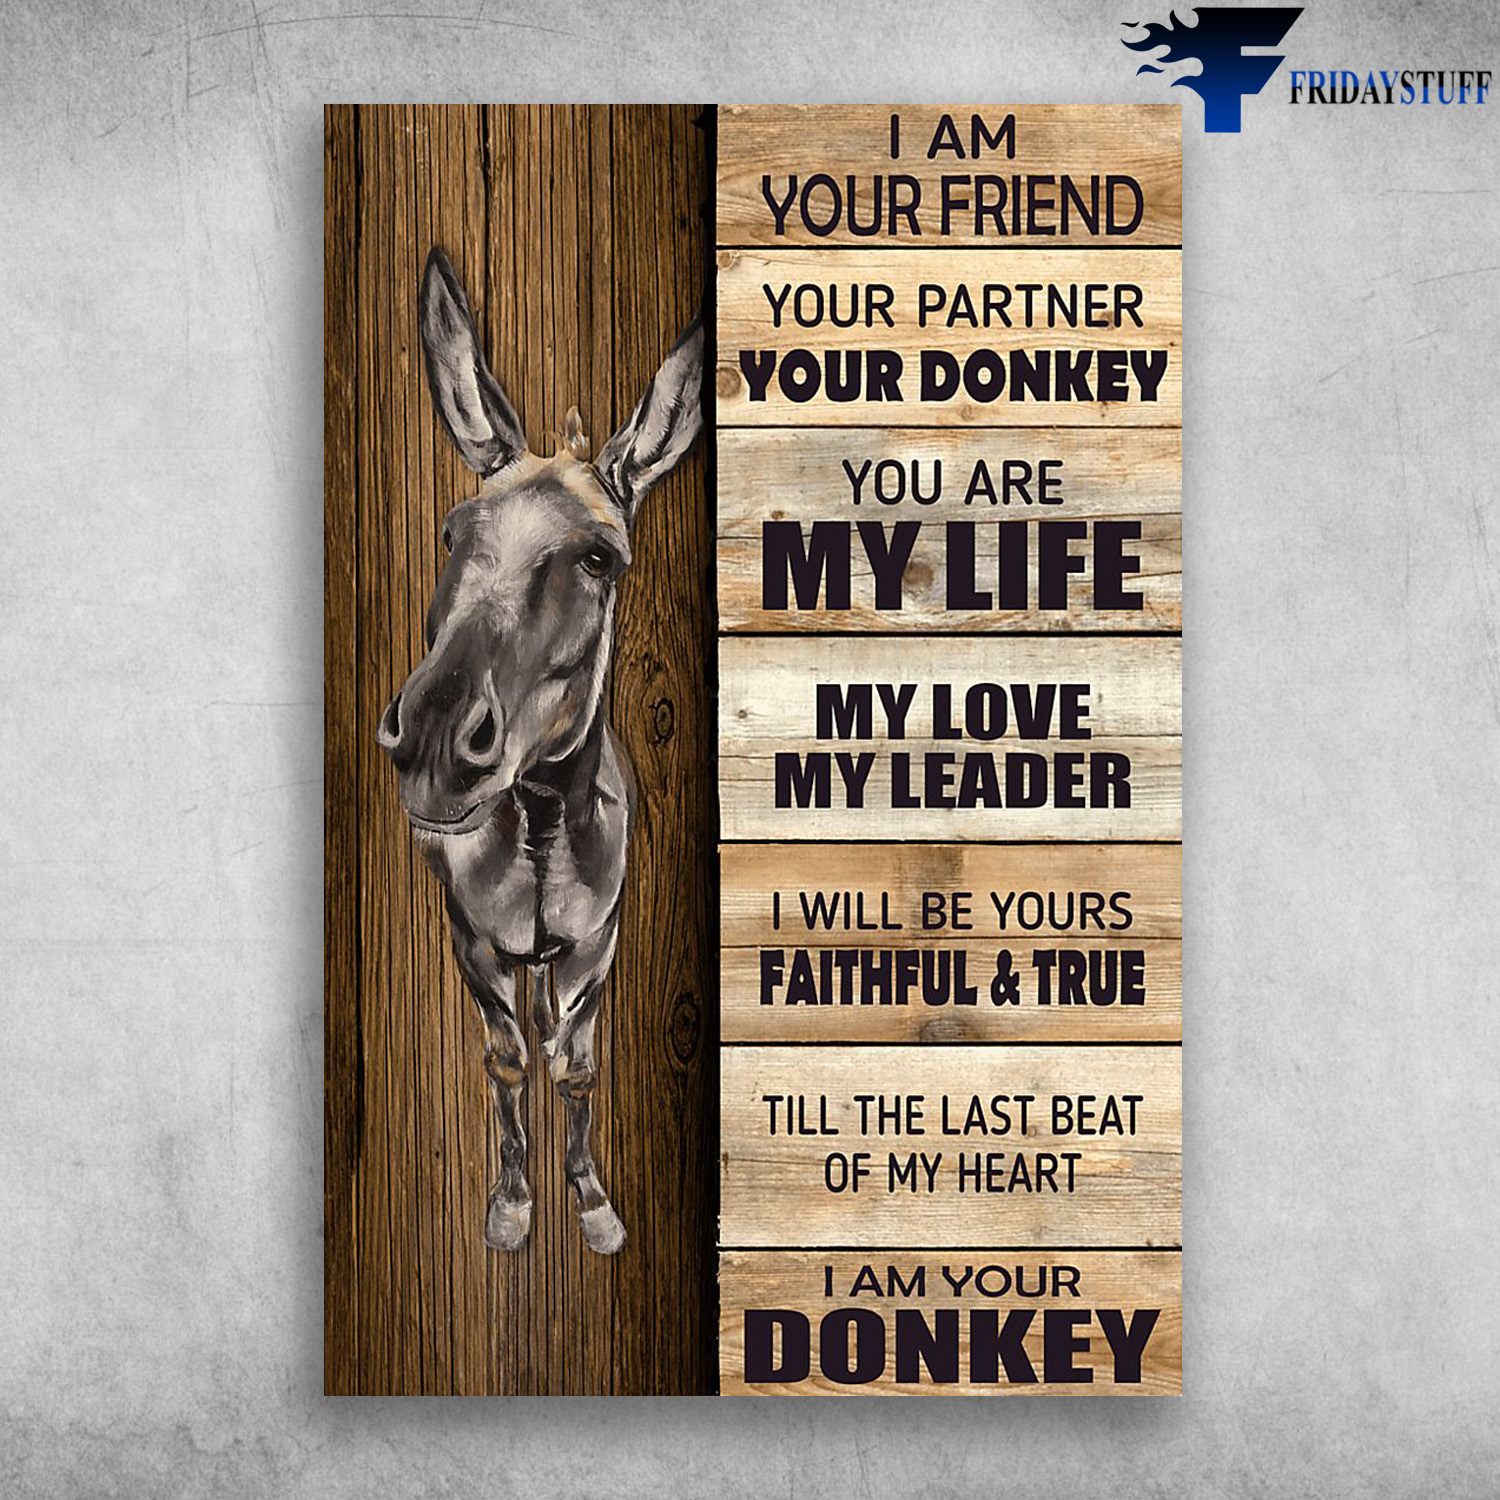 The Donkey - I Am Your Friend, Your Partner, Your Donkey, You Are My Life, My Love, My Leader, I Will Be Yours Faithfull And True, Till The Last Beat Of My Heart, I Am Your Donkey